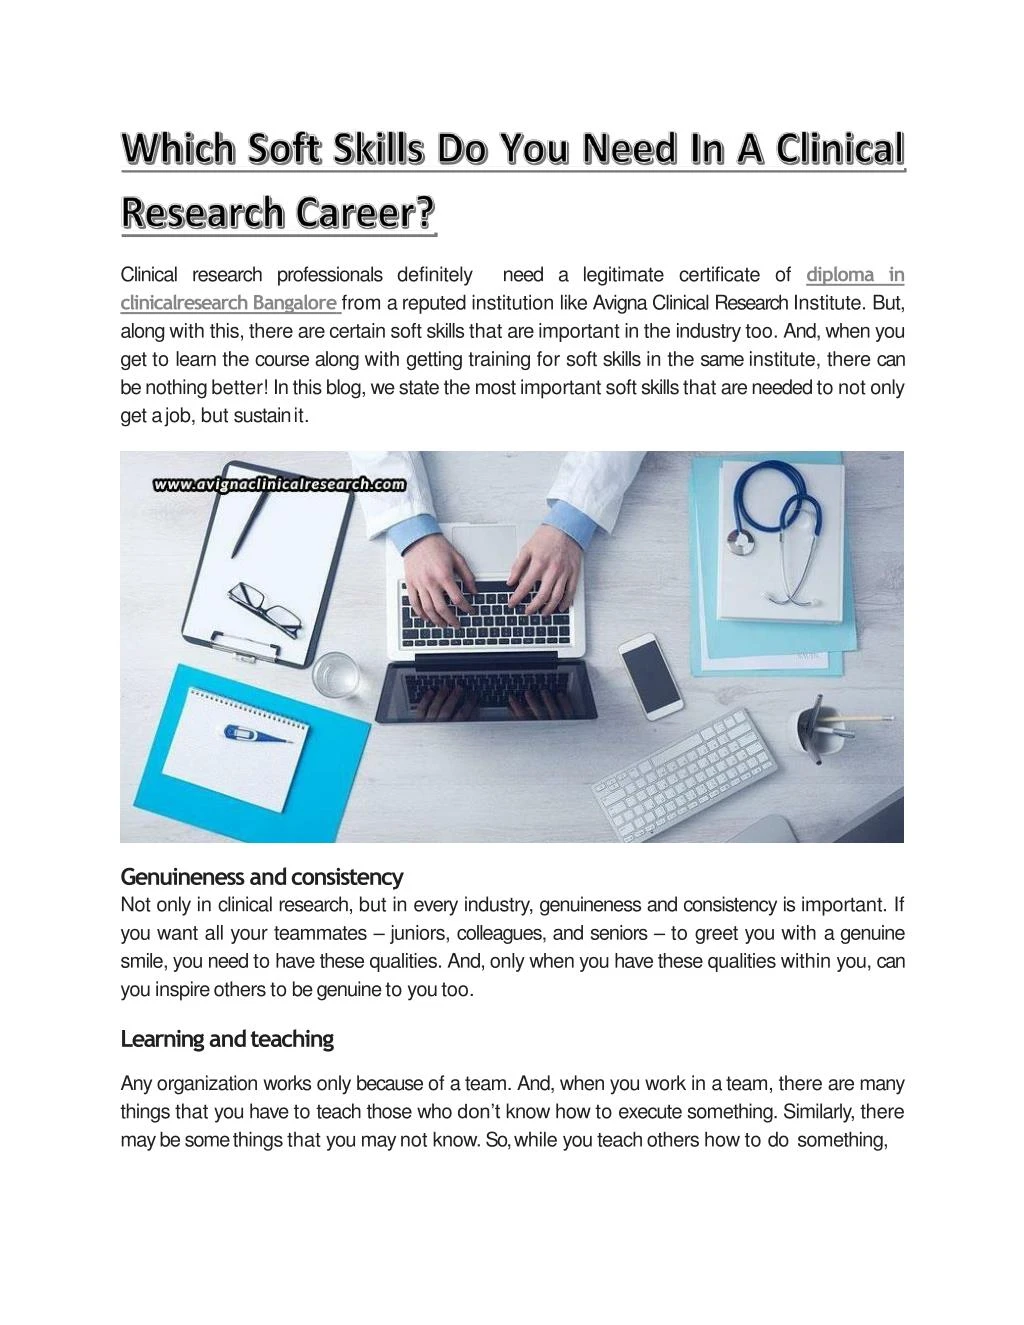 clinical research professionals definitely need